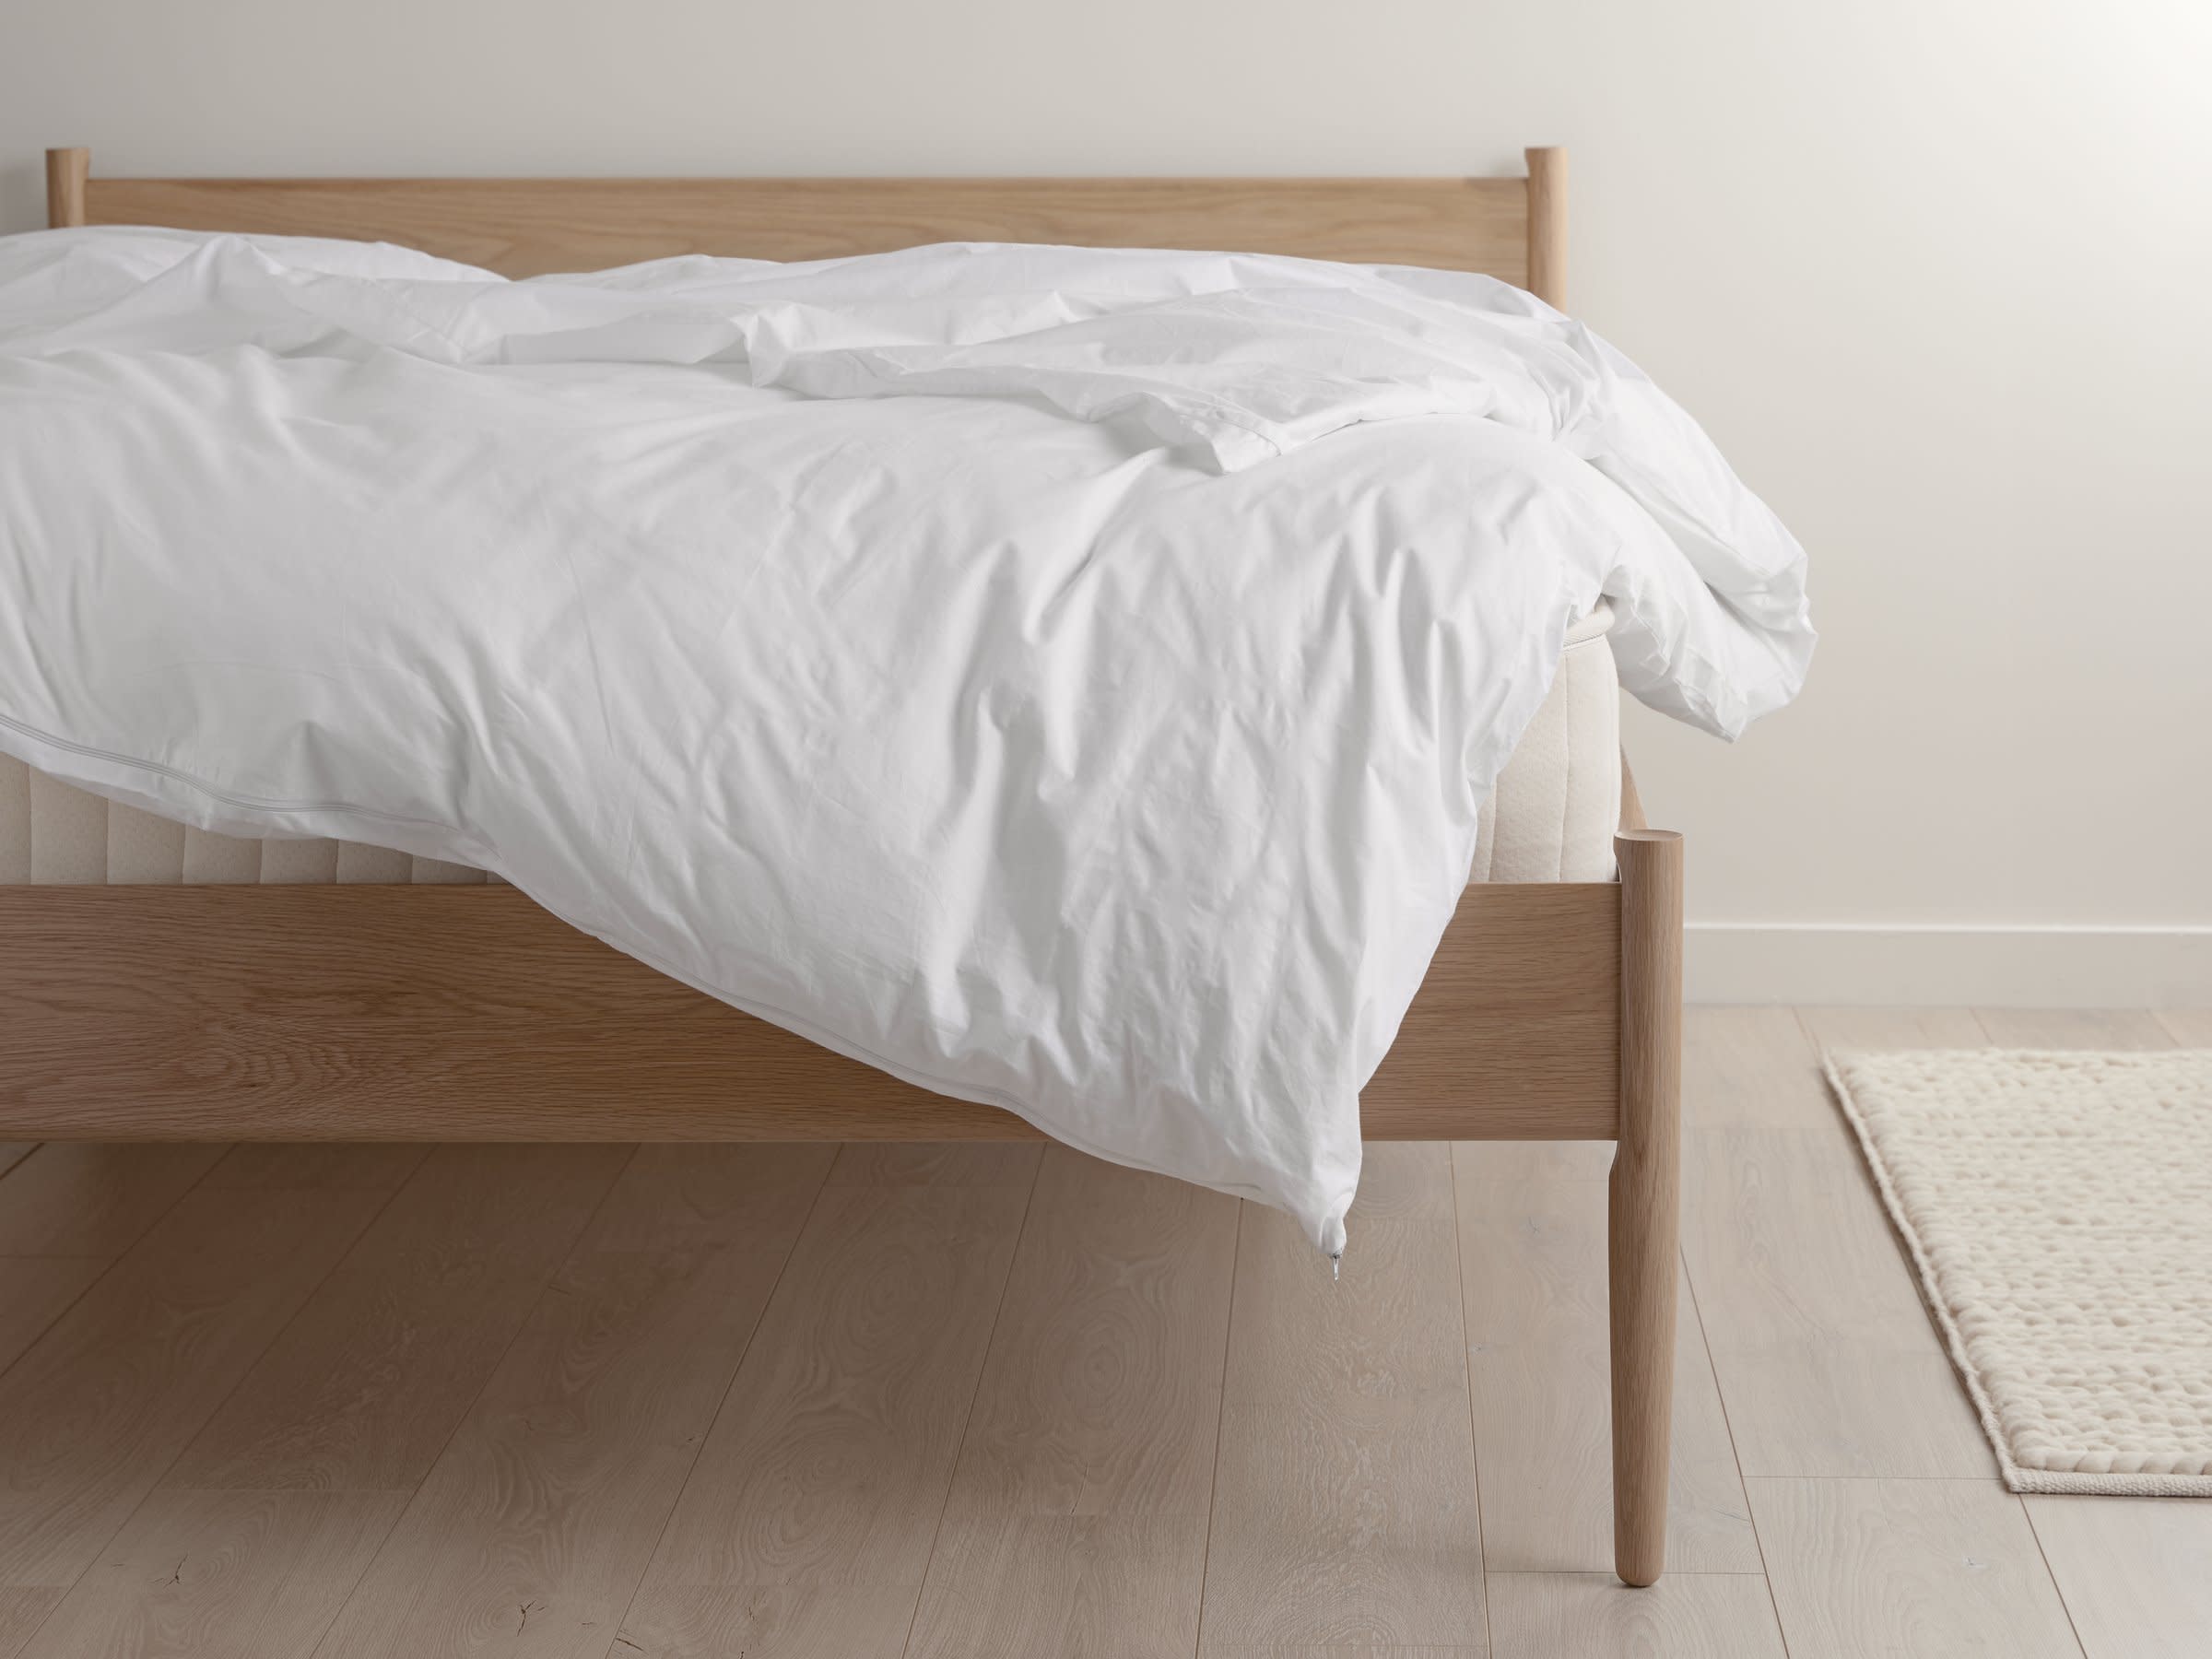 Cotton Duvet Protector Shown In A Room